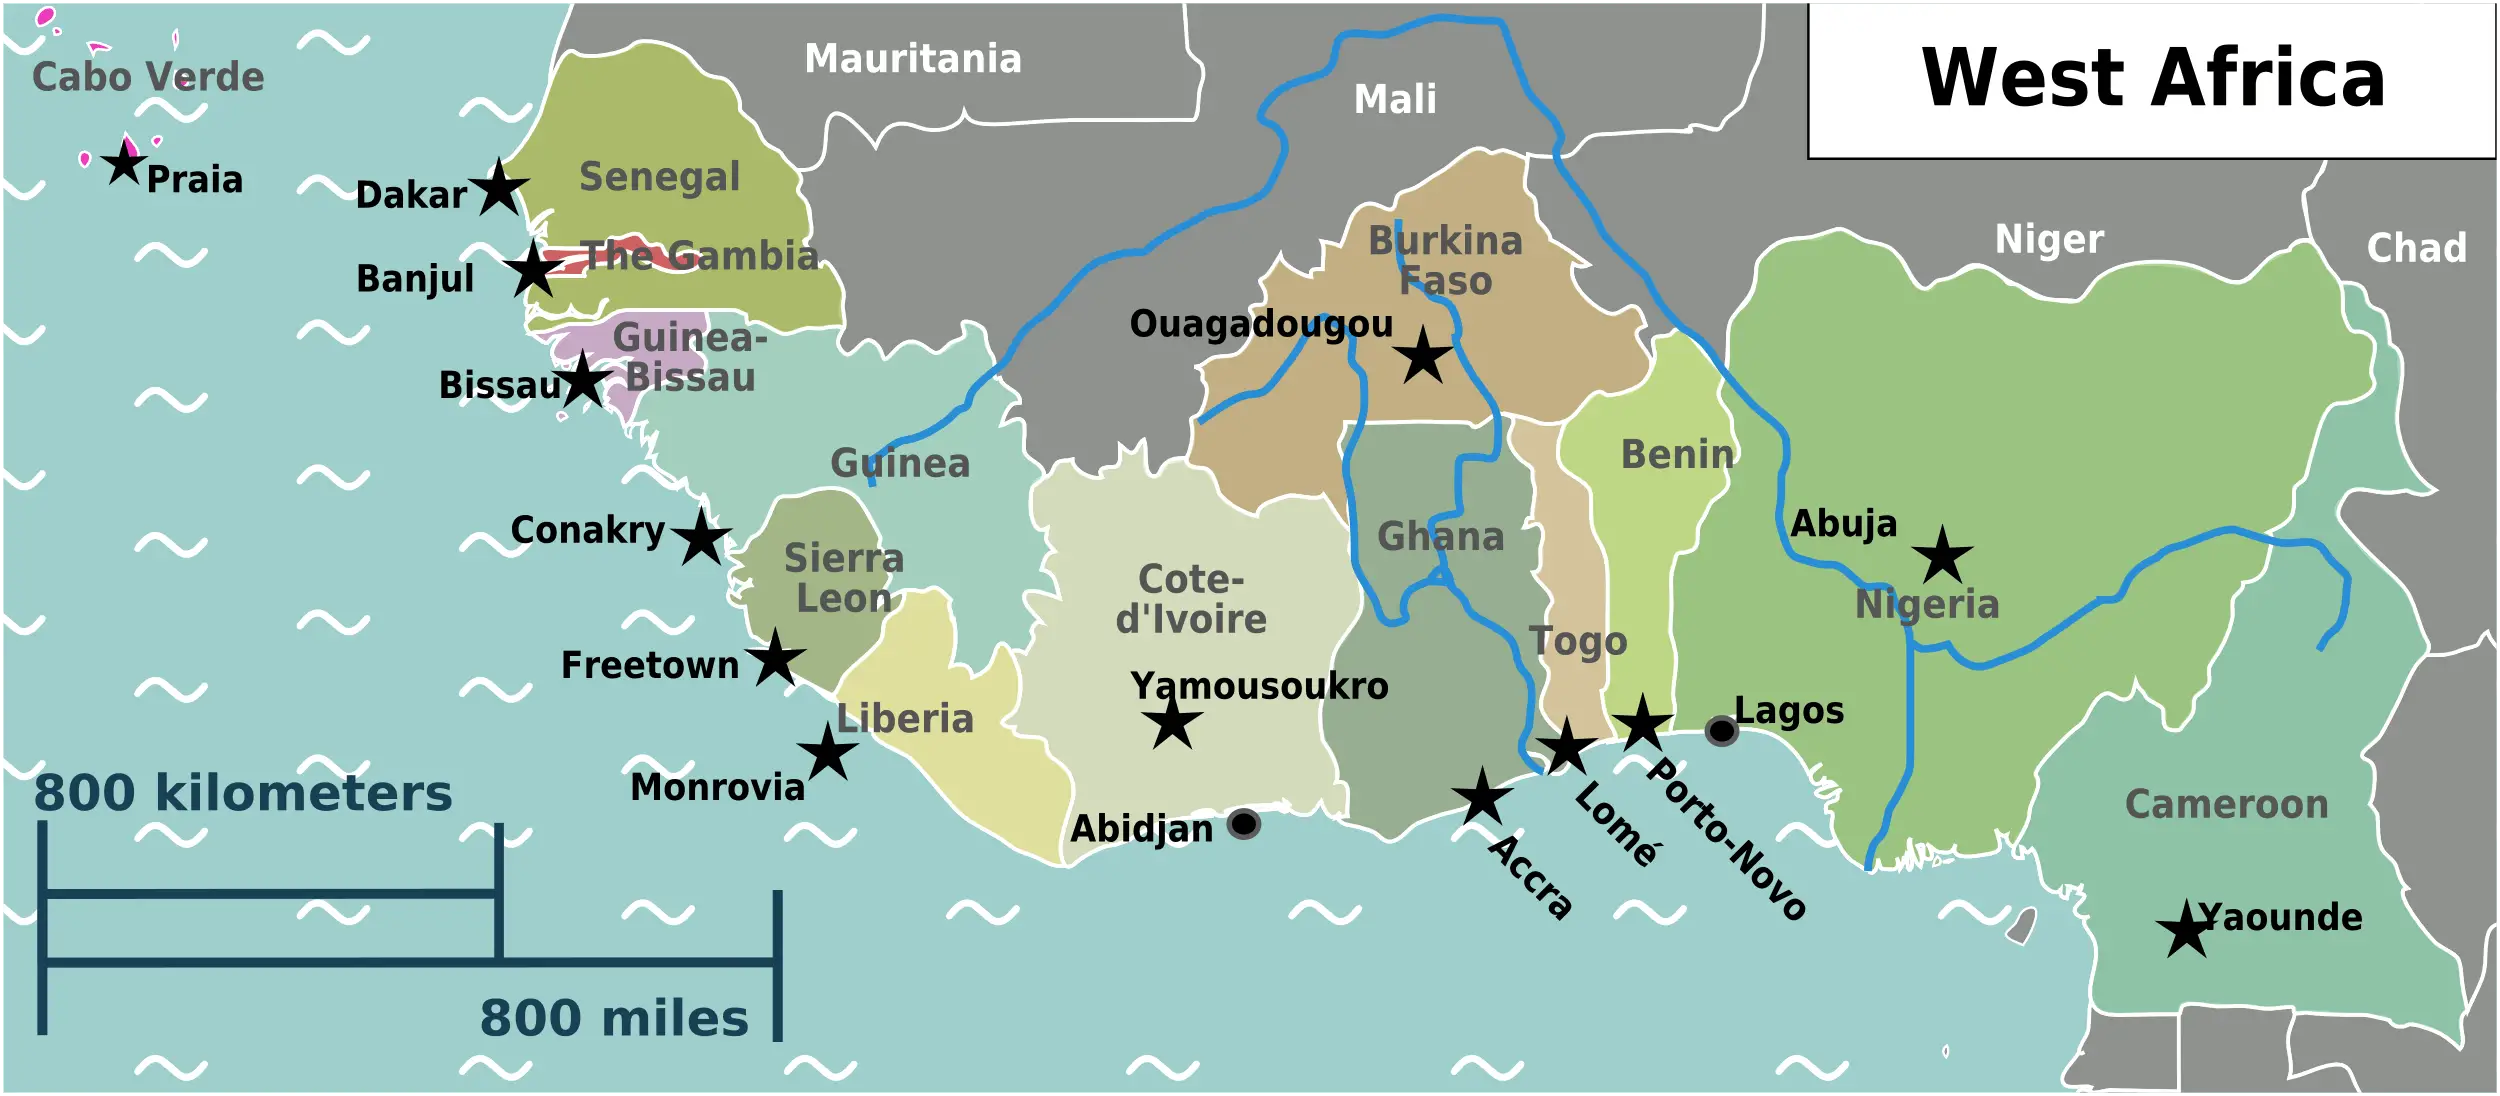 West Africa Regions Map